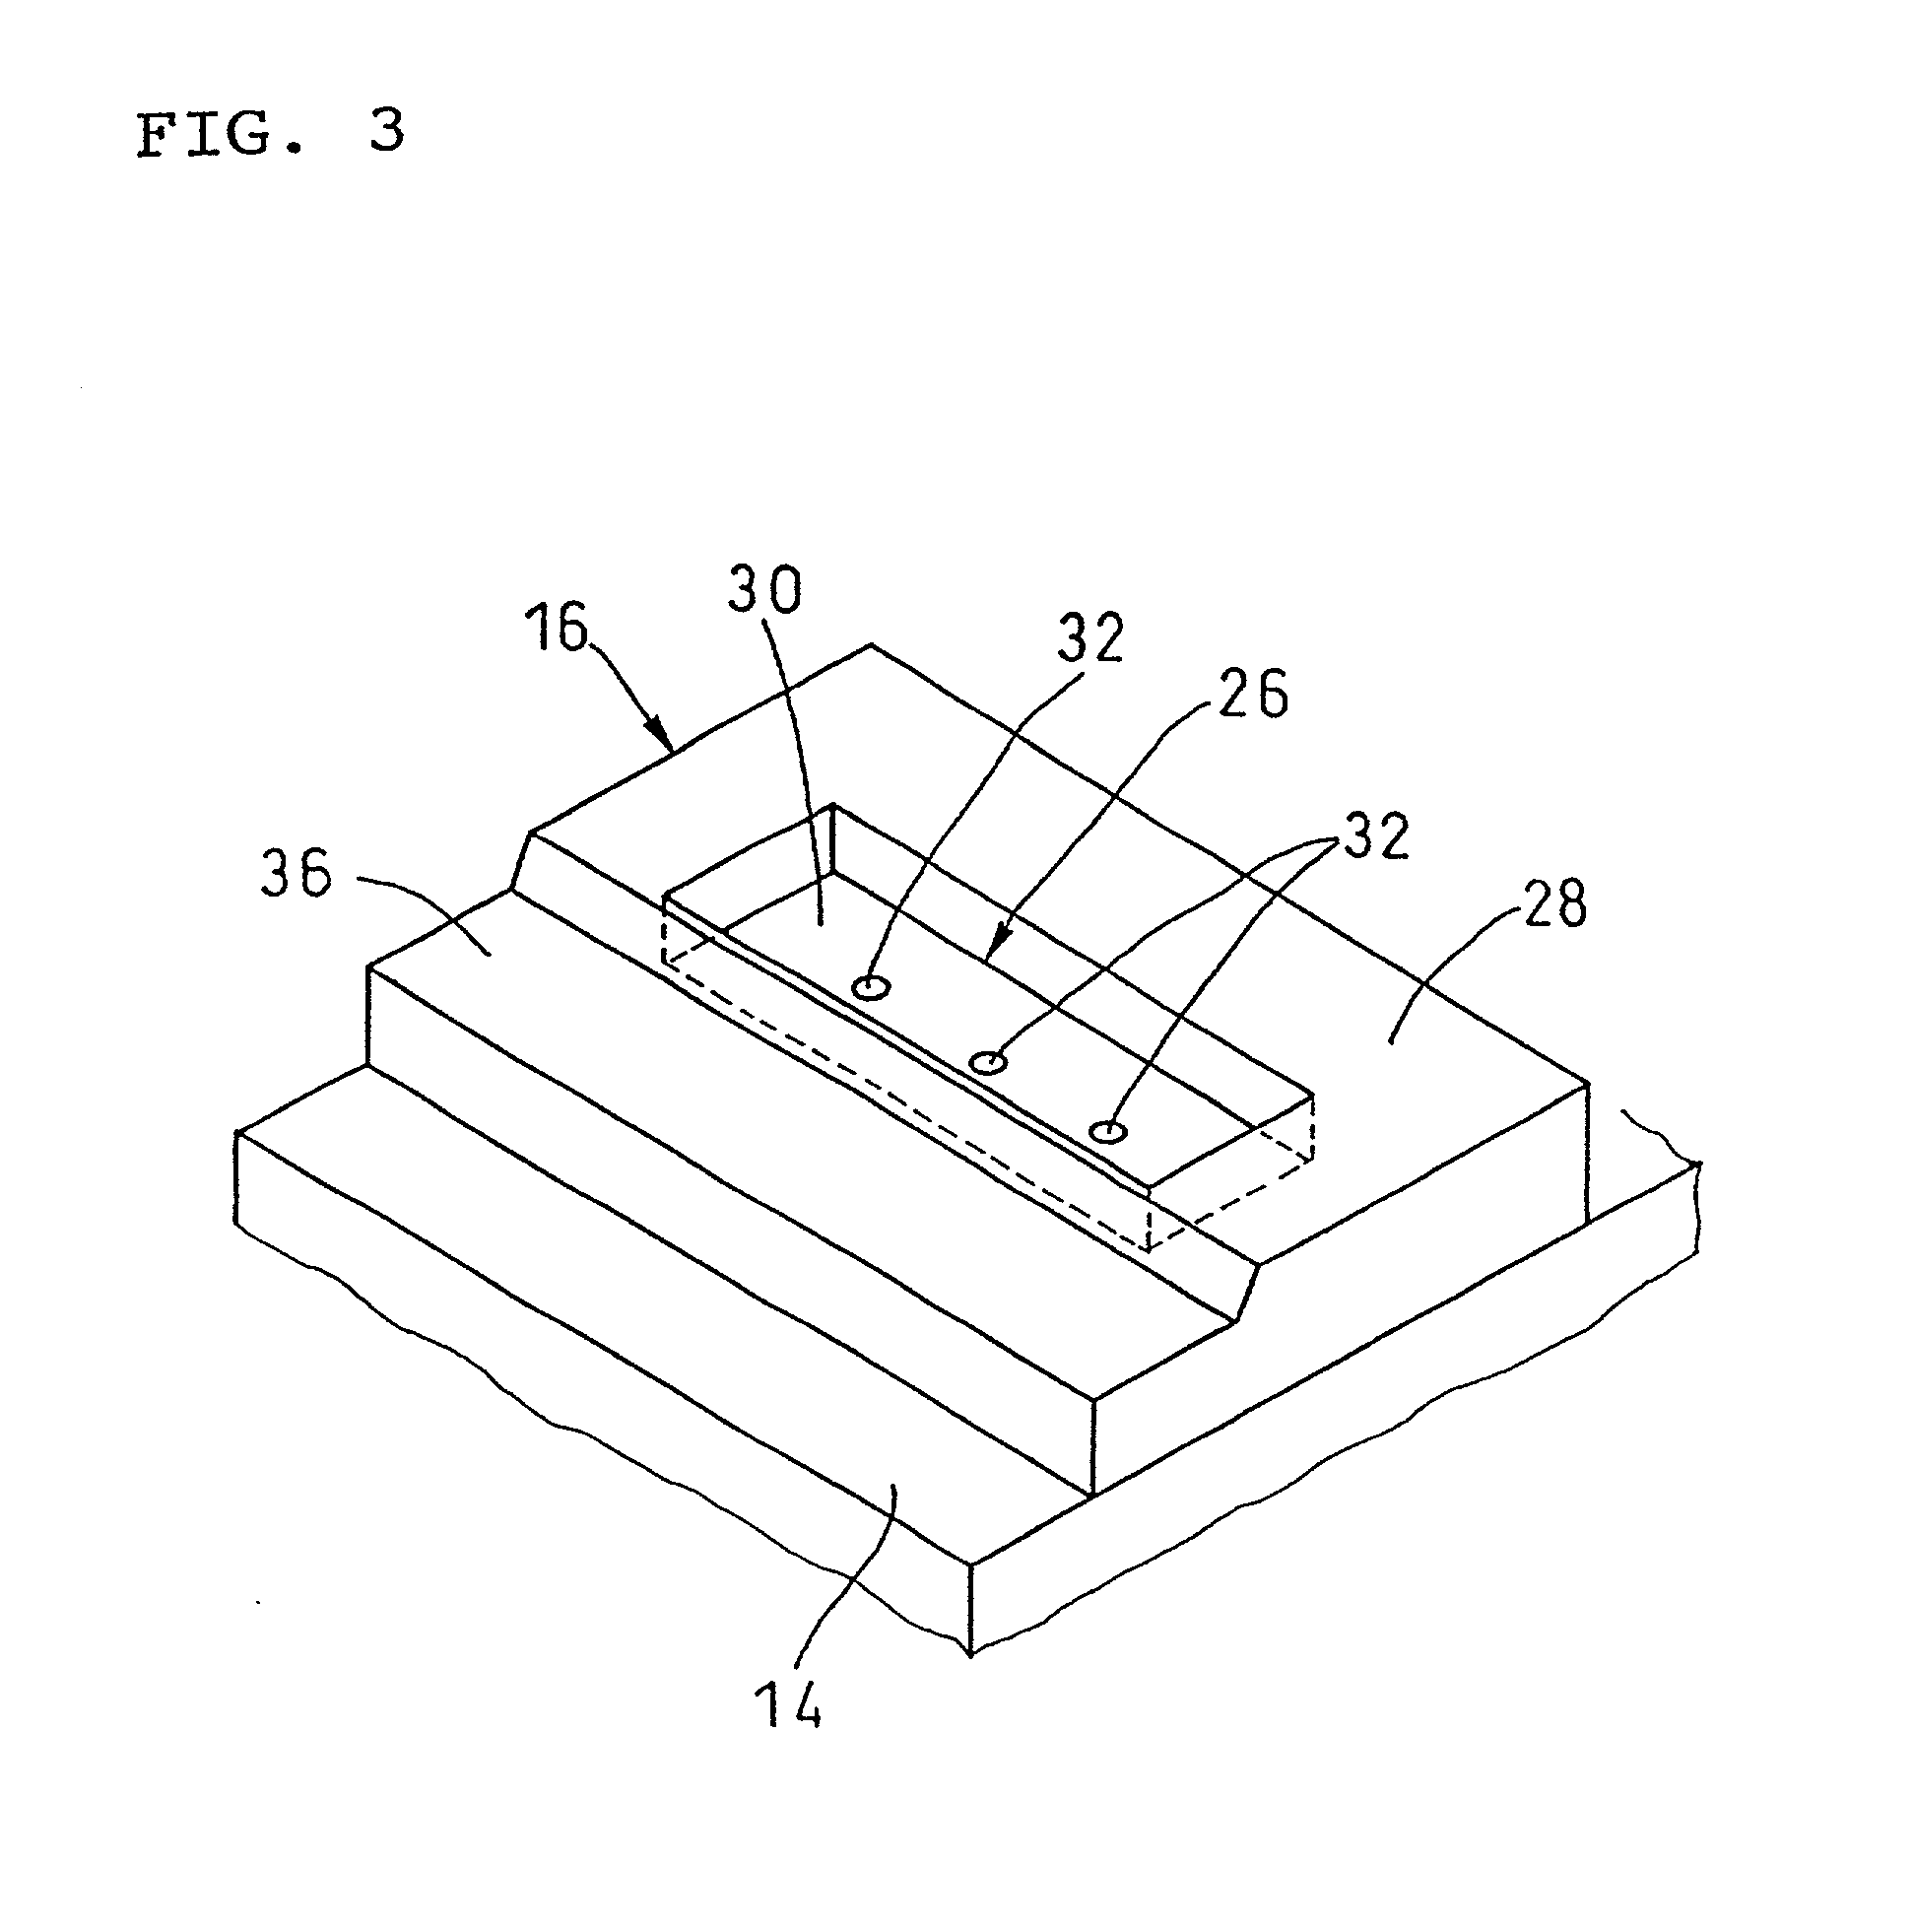 Solder bump forming method and apparatus